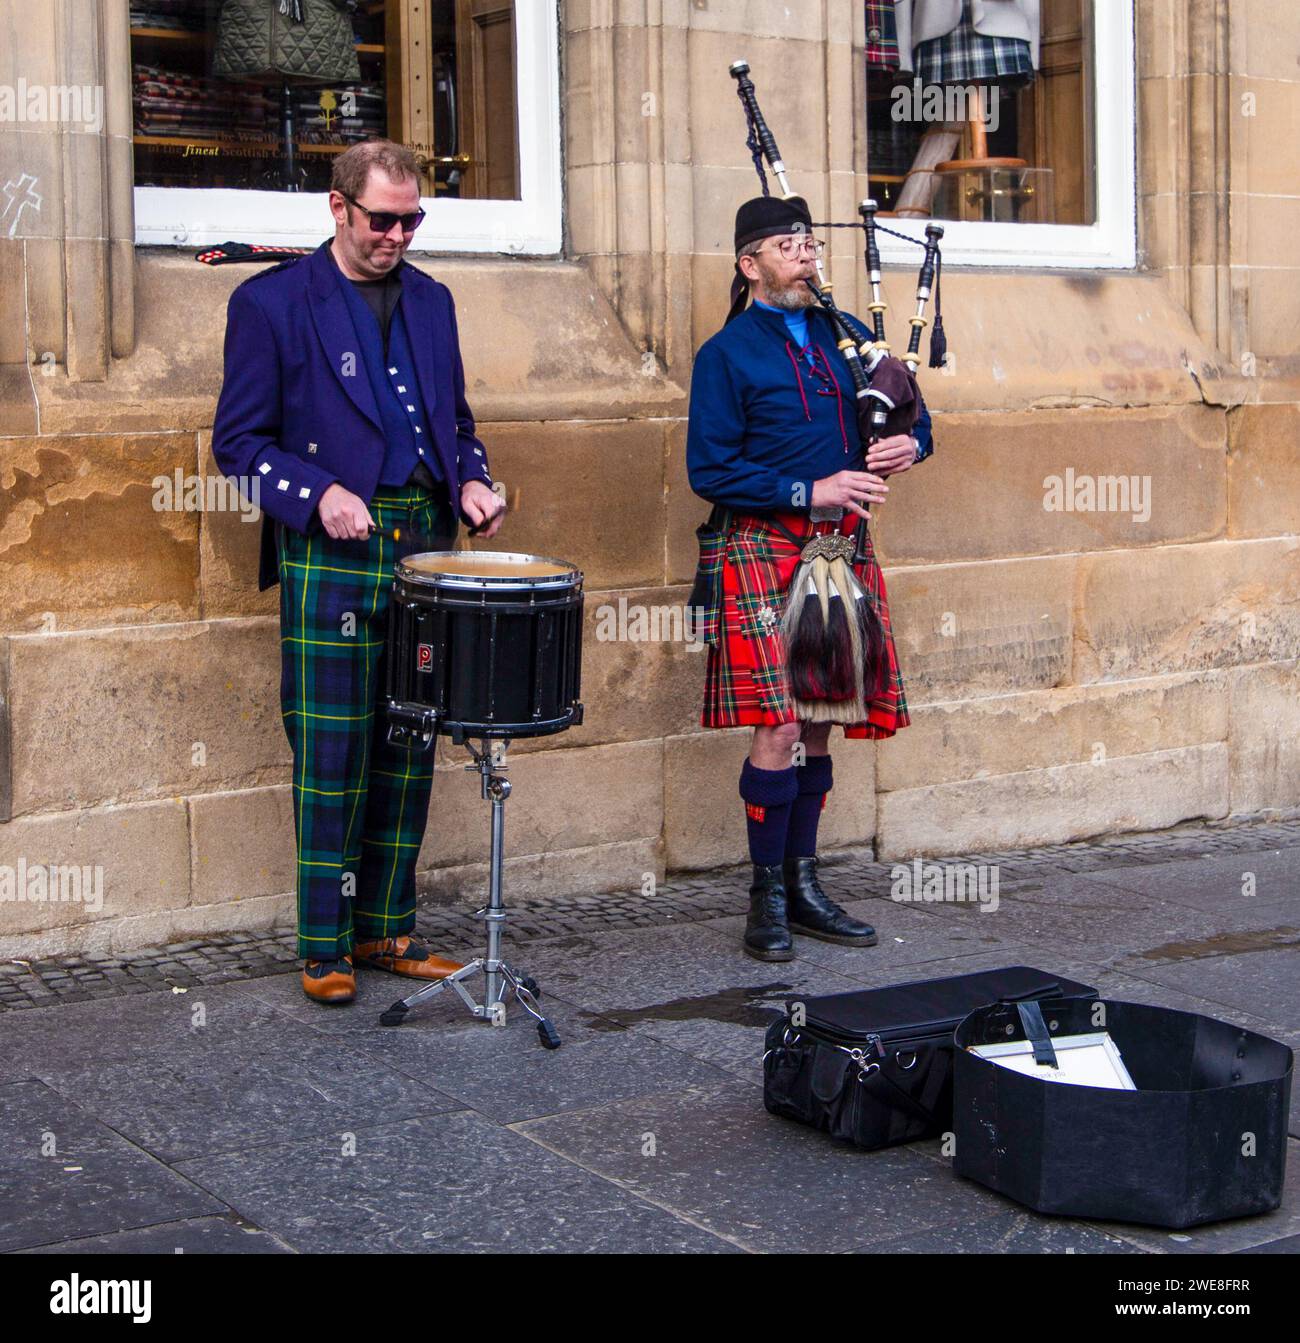 Street musicians performing, one playing the bagpipes and the other playing a snare drum in an urban setting Royal Mile Edinburgh. Stock Photo